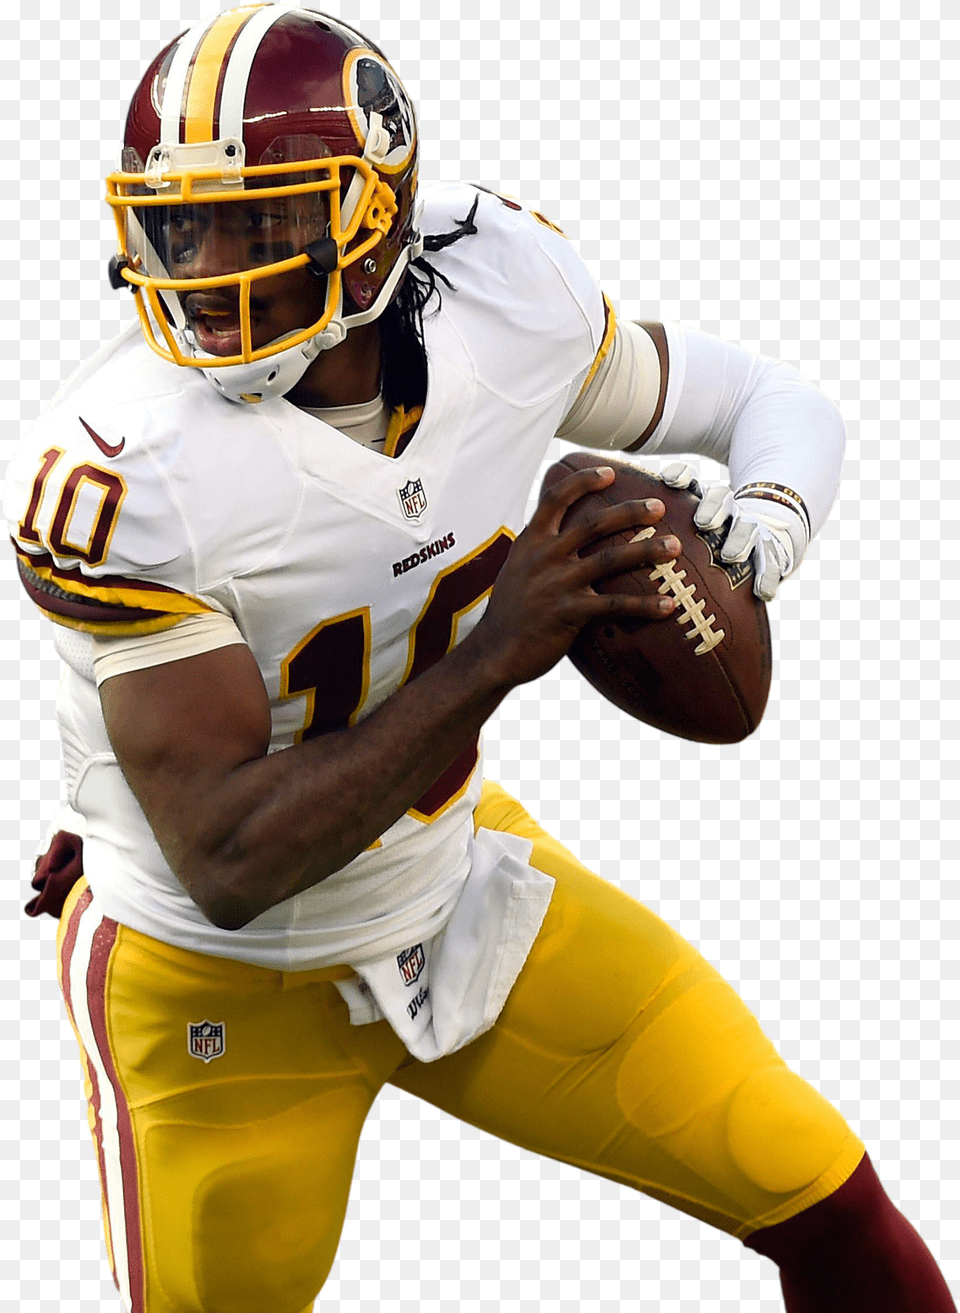 Rg3 Throwback Thursday Graphic Revolution Helmets, American Football, Football, Football Helmet, Helmet Free Png